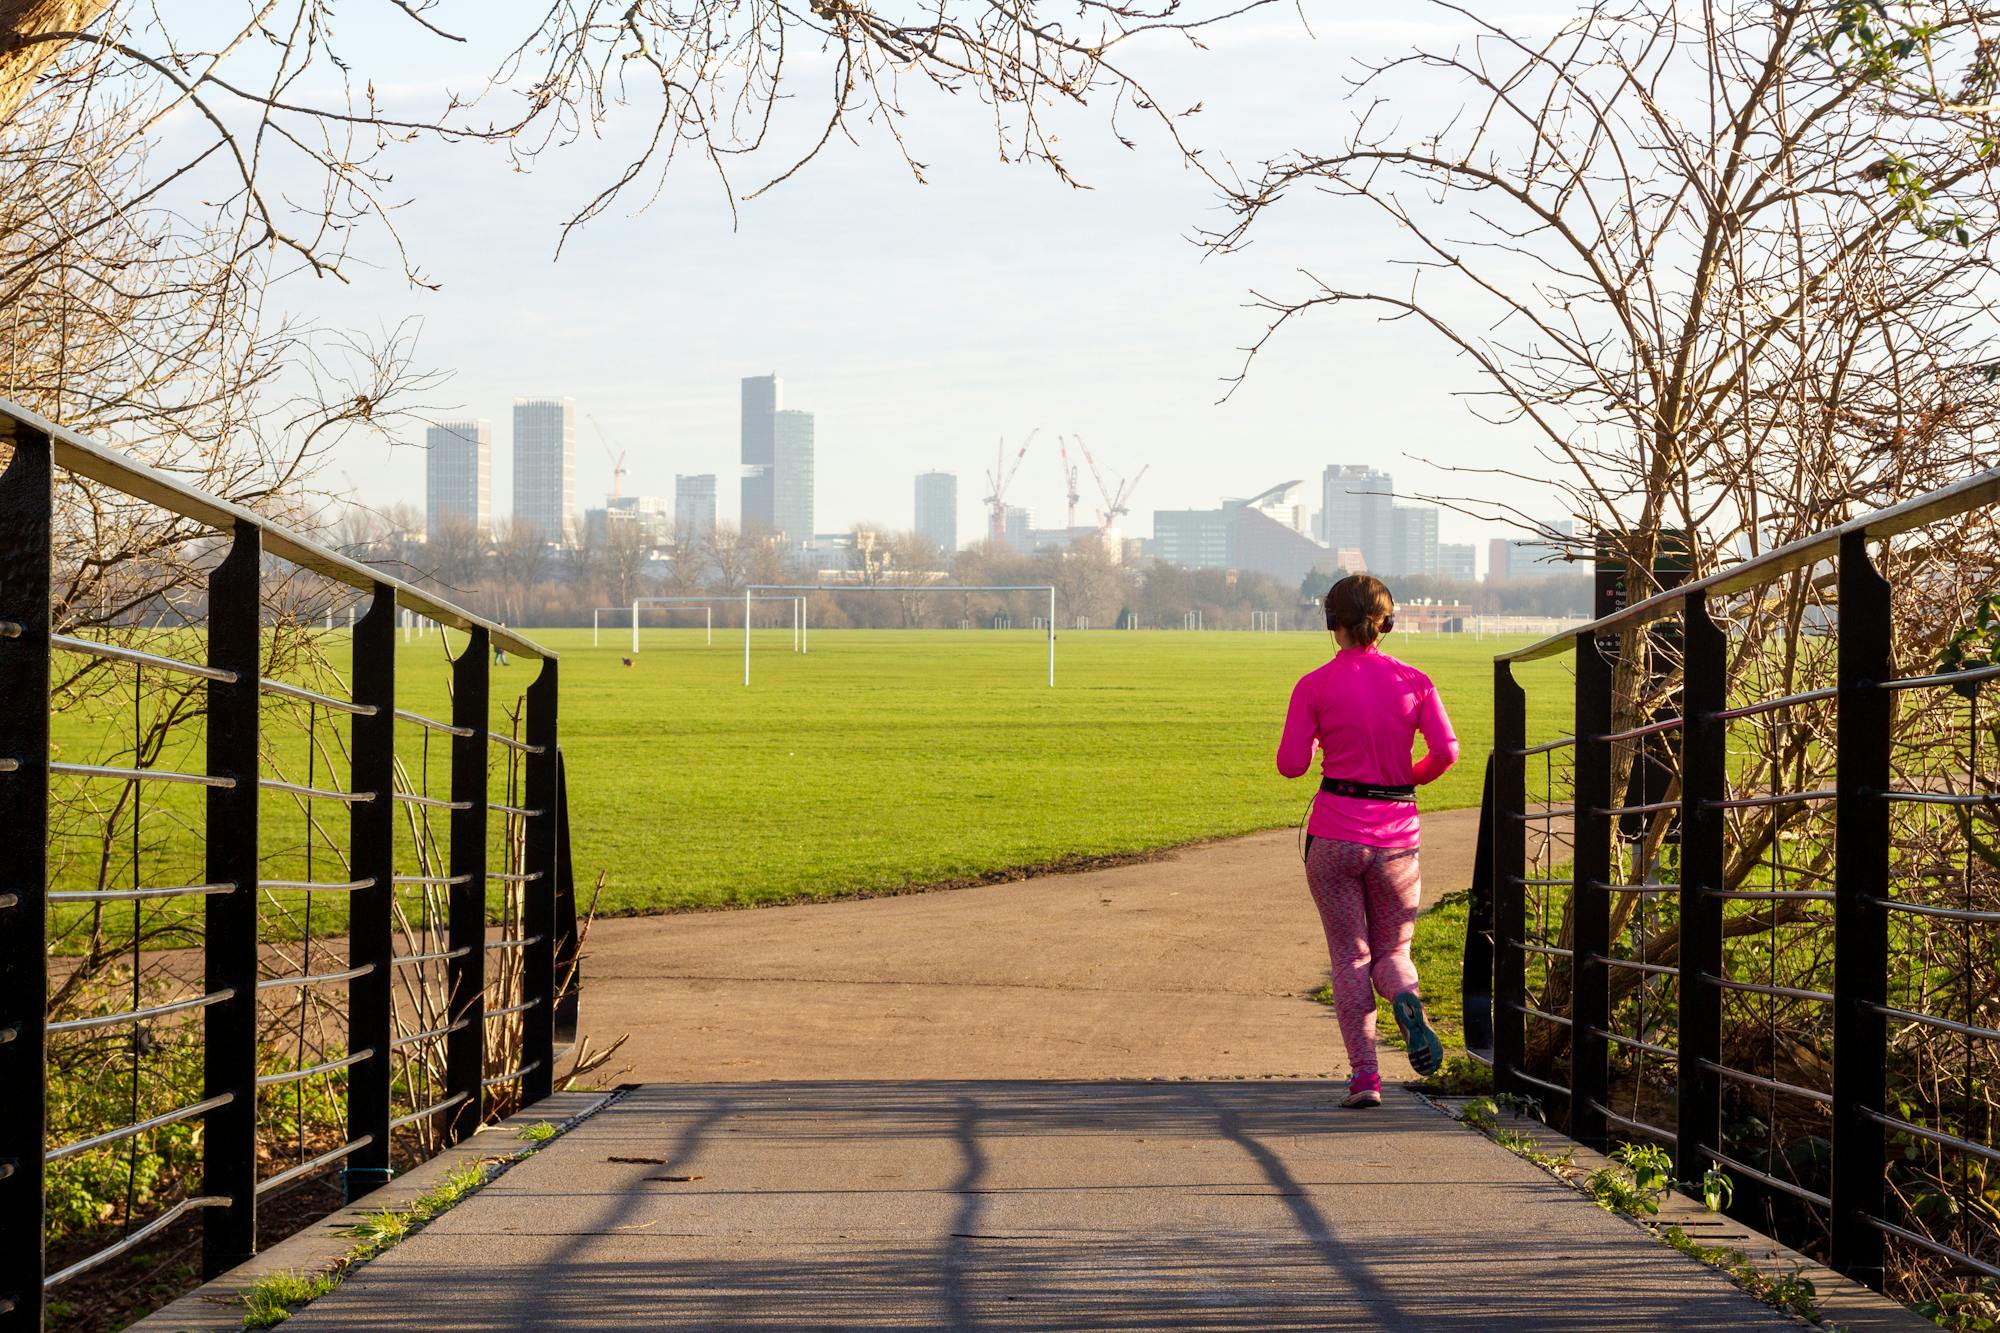 Jogging in Hackney Marshes with the London skyline behind